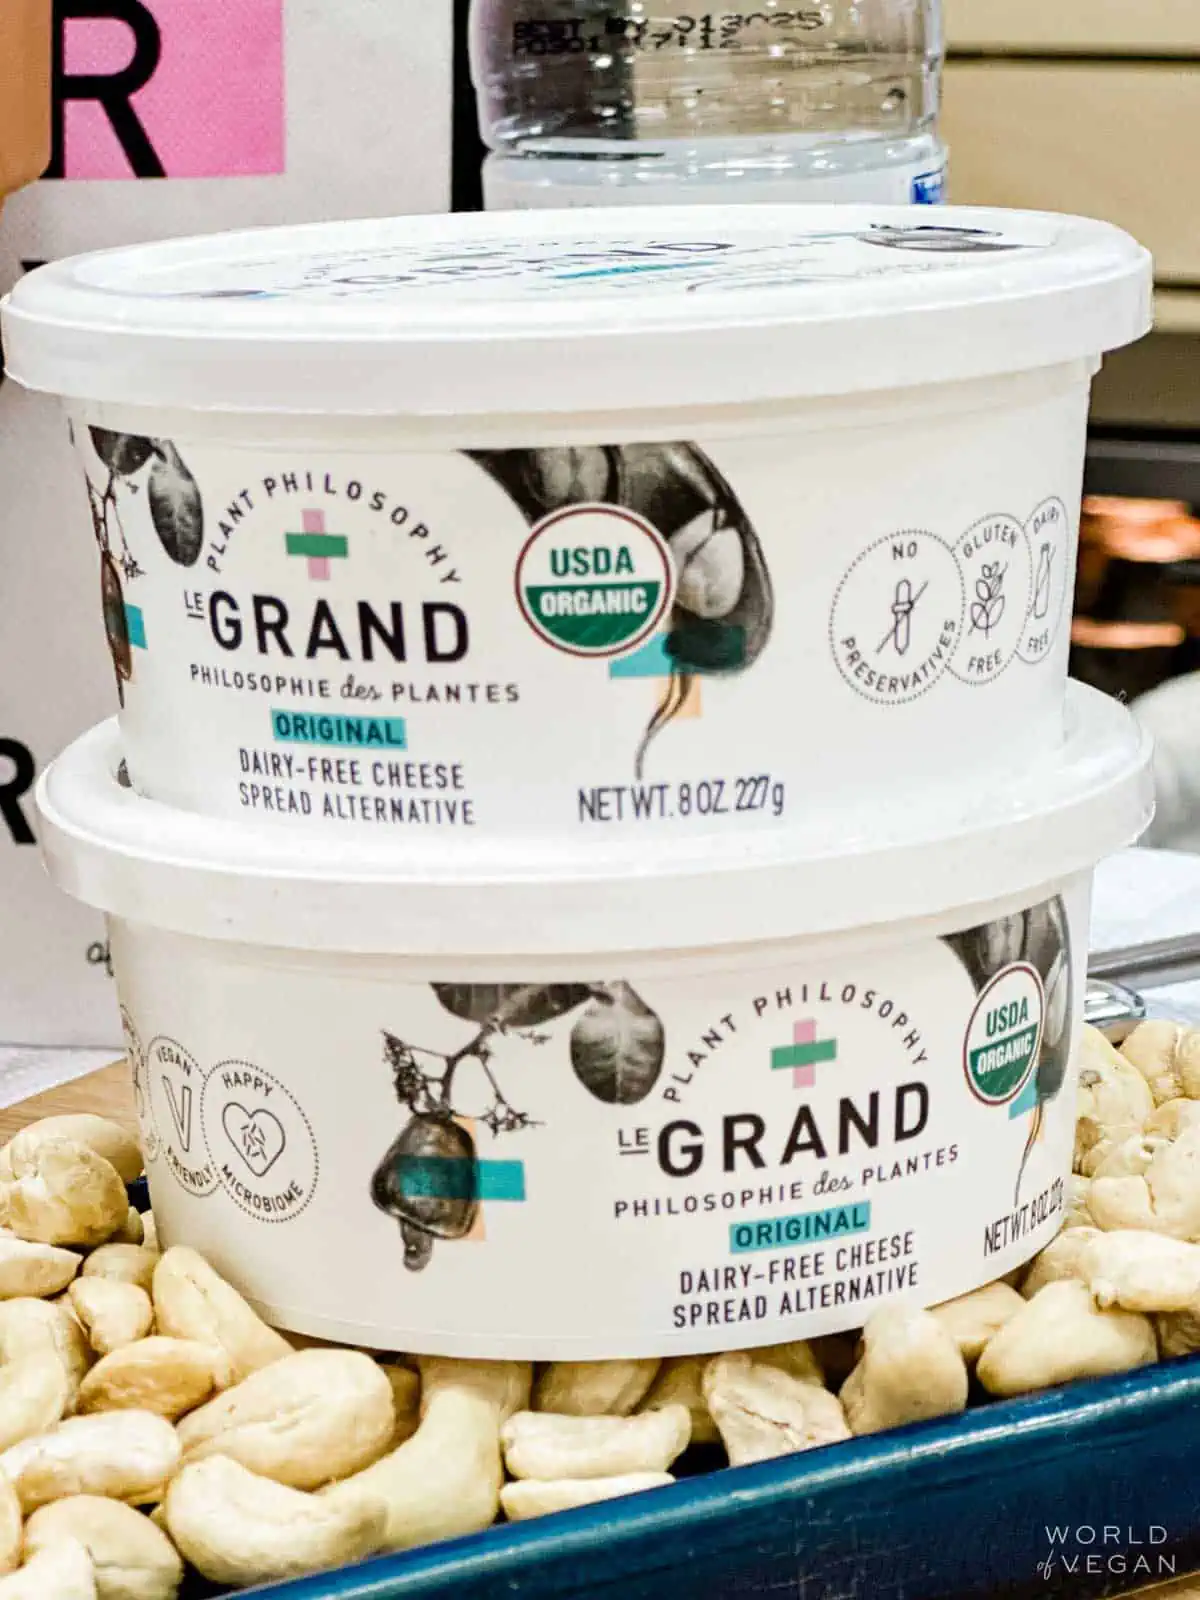 Two tubs of LeGrand vegan cream cheese spread.